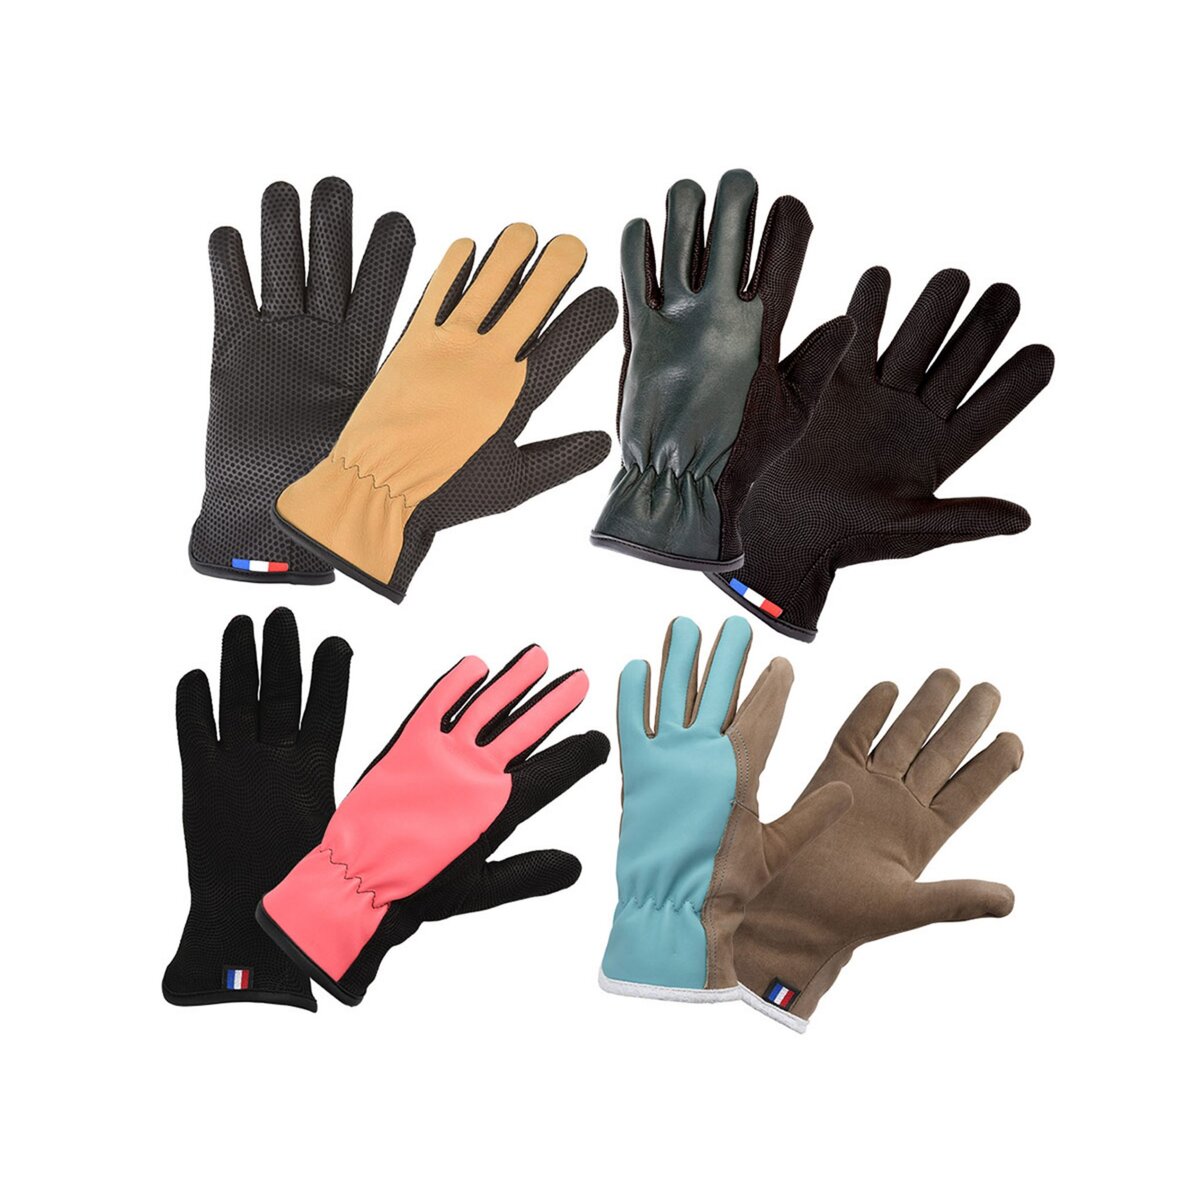 ROSTAING Gants de protection en cuir FRENCHIE Jardinage - Taille 6